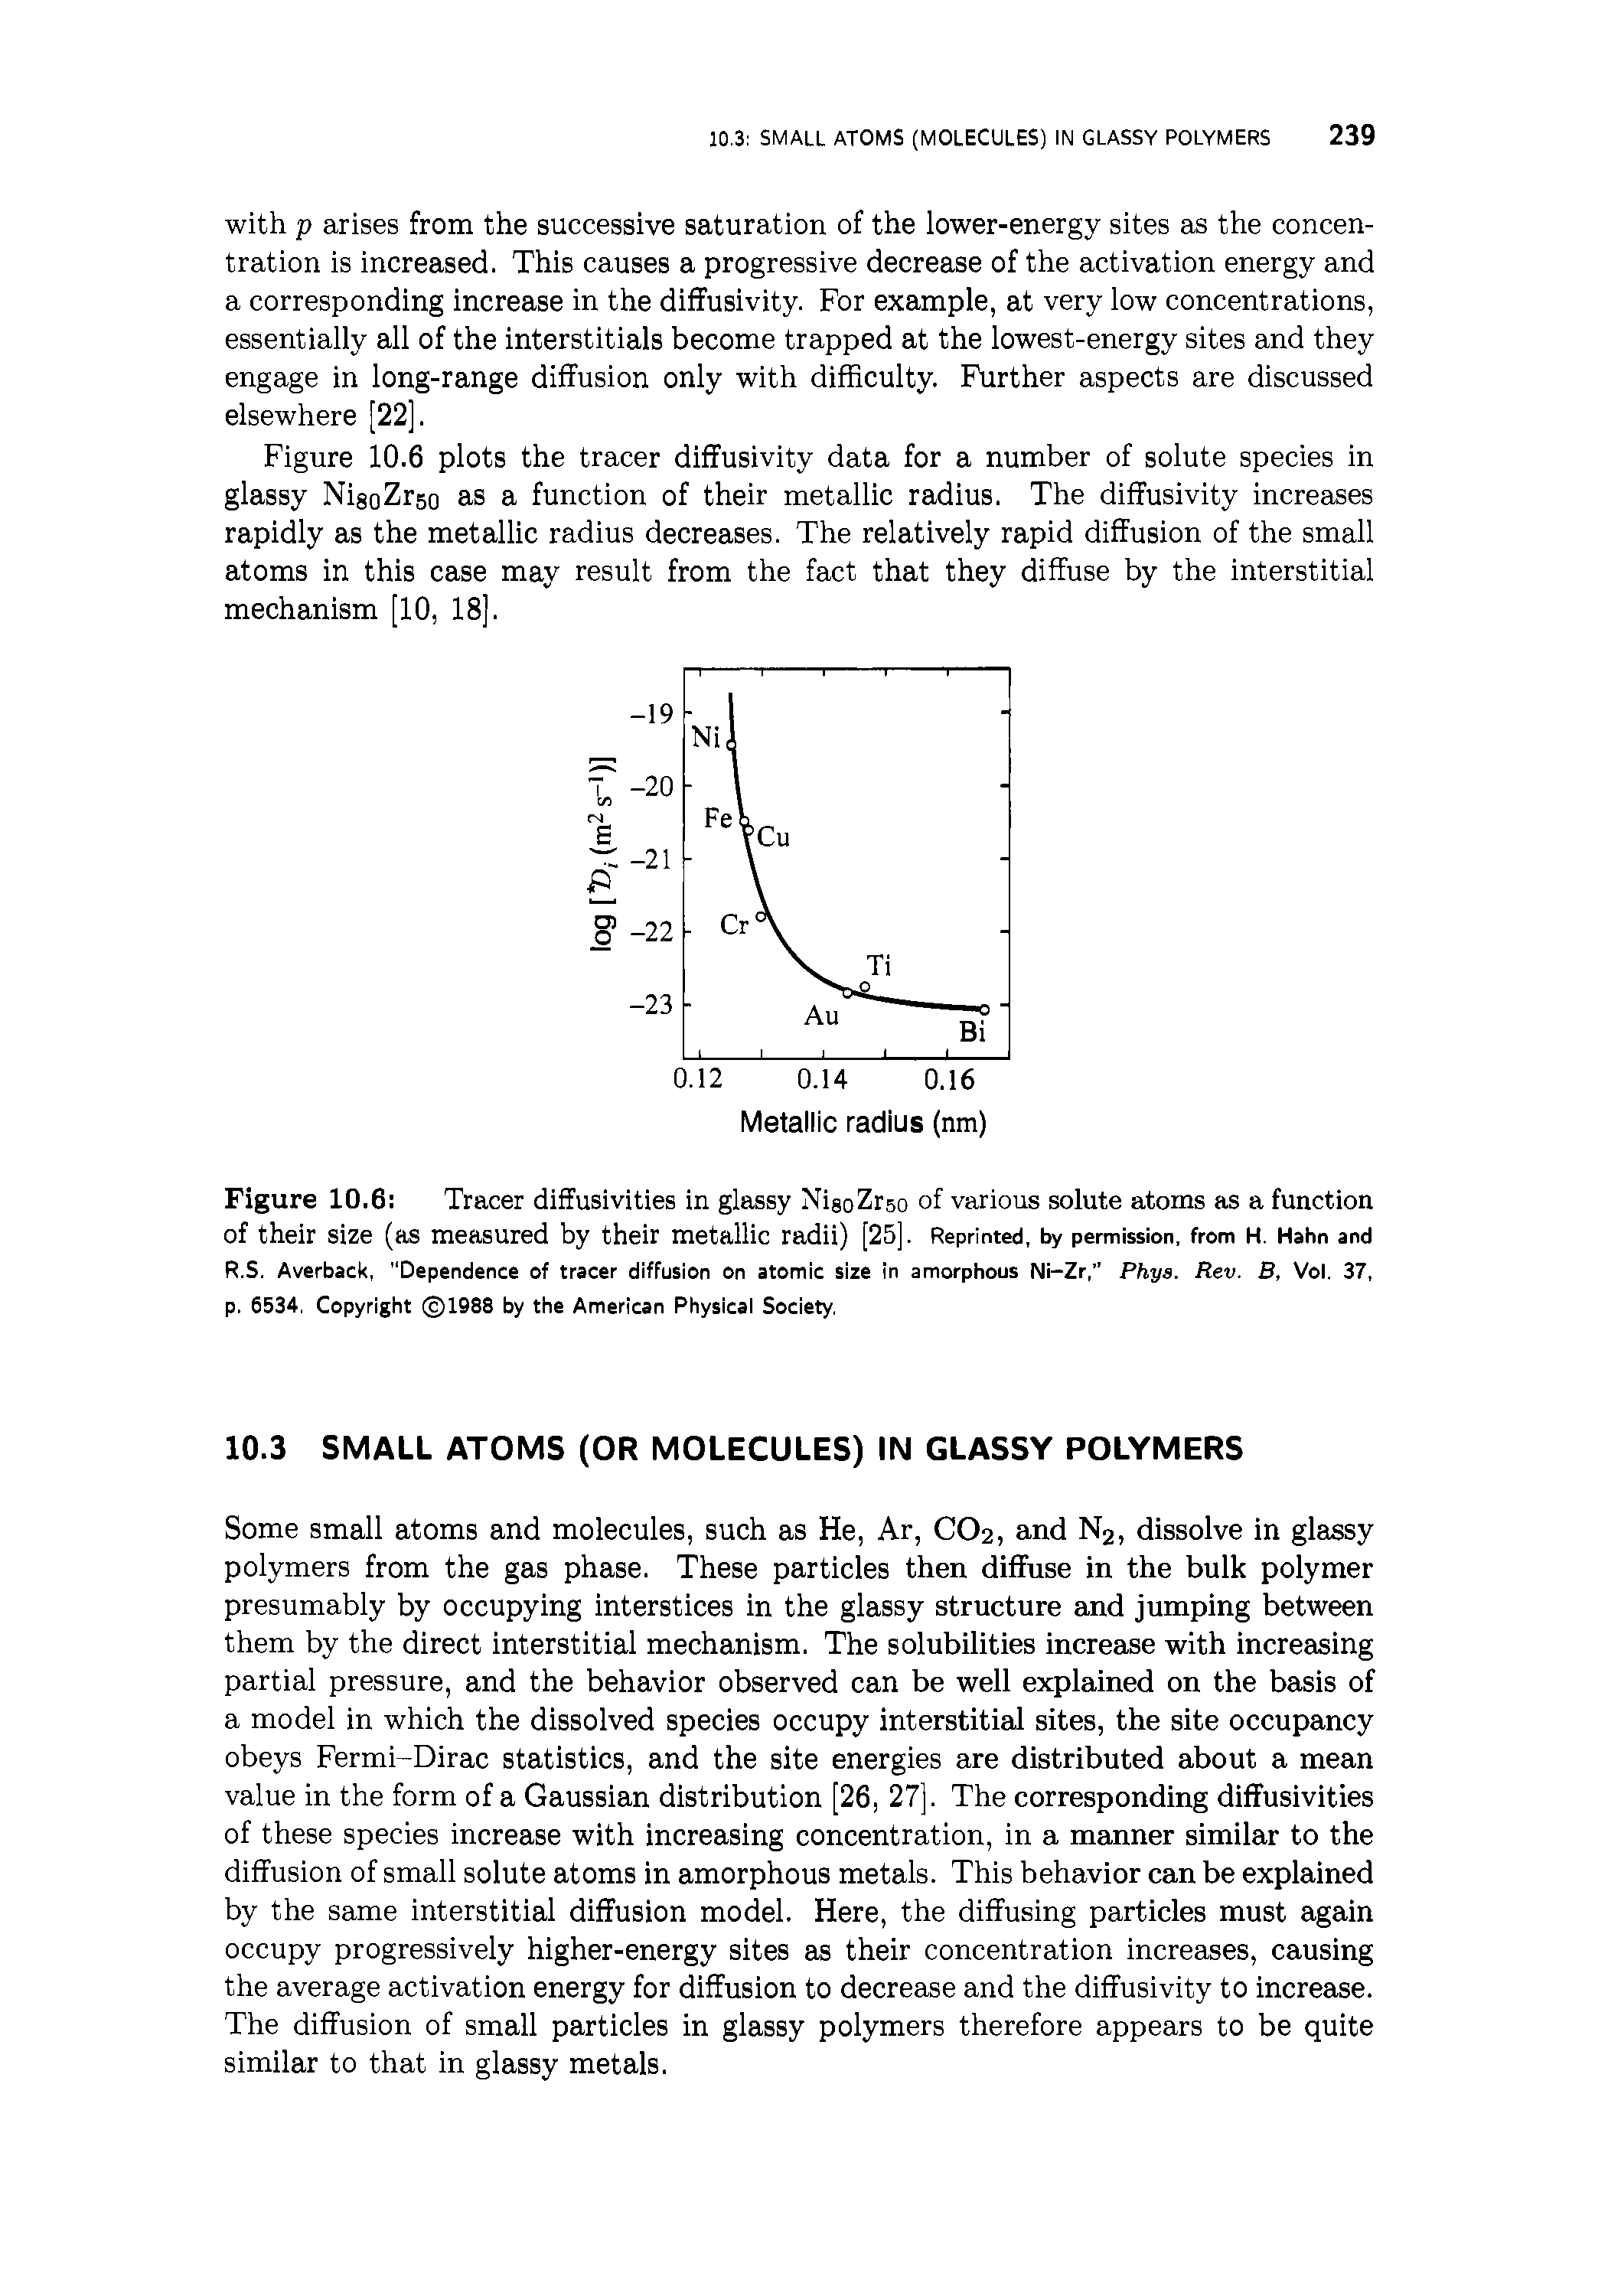 Figure 10.6 Tracer diffusivities in glassy NisoZrso of various solute atoms as a function of their size (as measured by their metallic radii) [25]. Reprinted, by permission, from H. Hahn and R.S. Averback, "Dependence of tracer diffusion on atomic size in amorphous Ni-Zr," Phys. Rev. B, Vol. 37, p. 6534. Copyright 1988 by the American Physical Society.